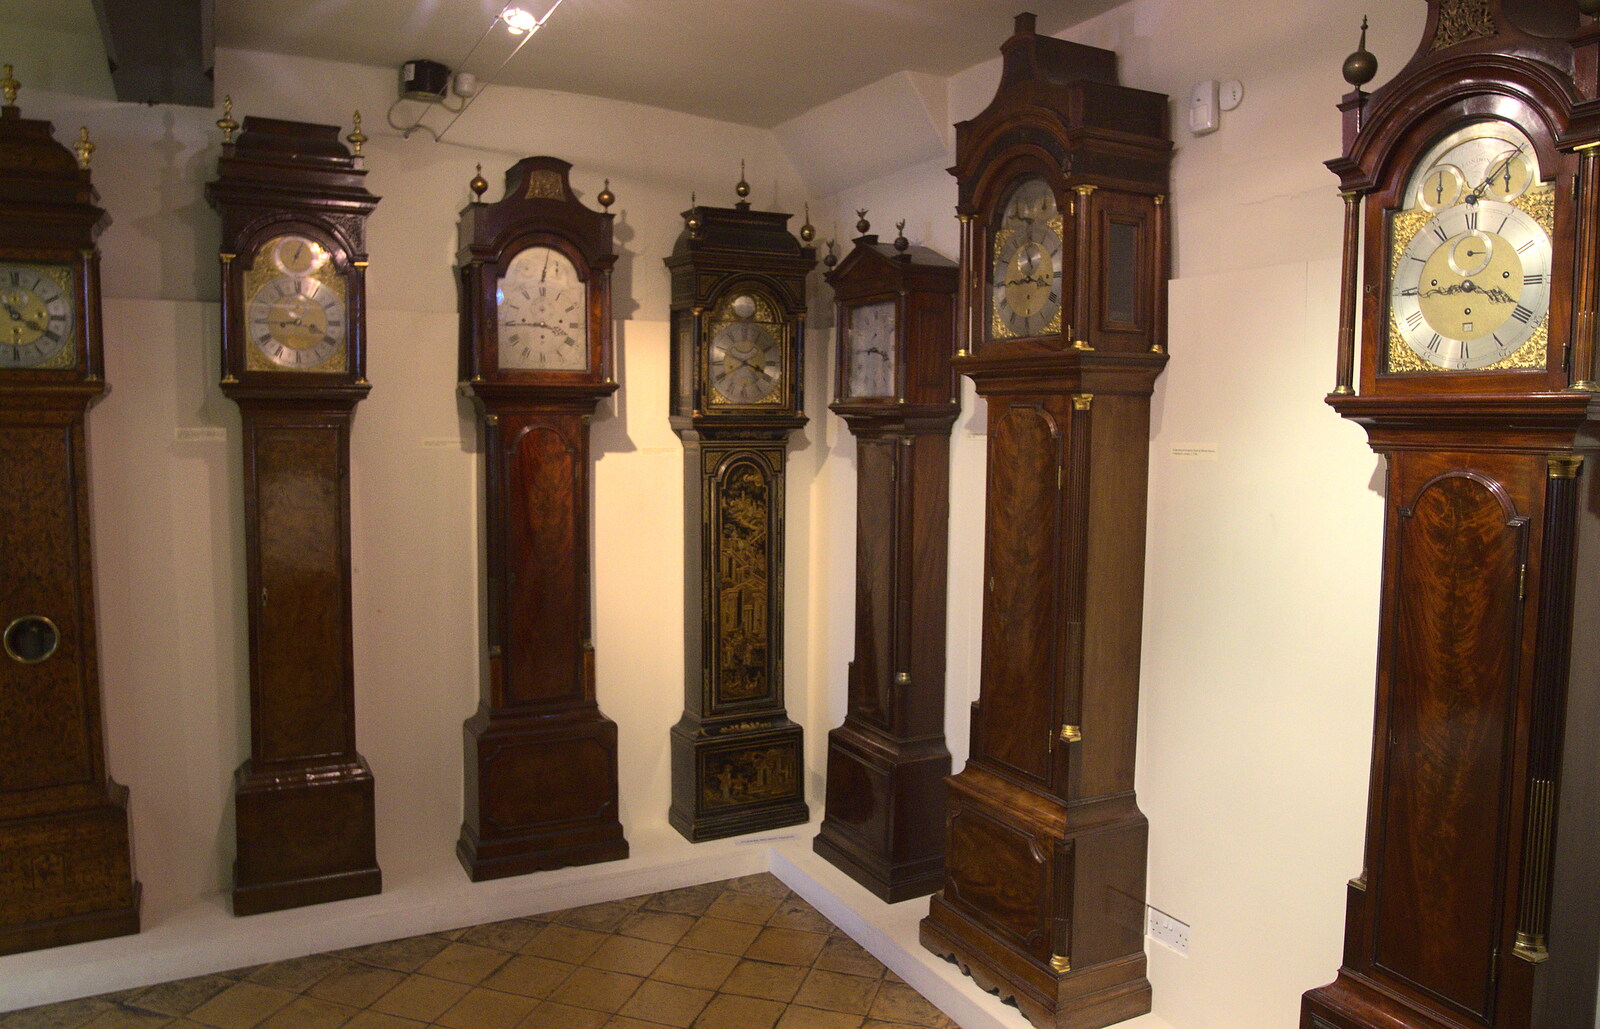 A room full of Grandfather and Longcase clocks from Wavy and Martina's Combined Birthdays, Thrandeston, Suffolk - 27th May 2017